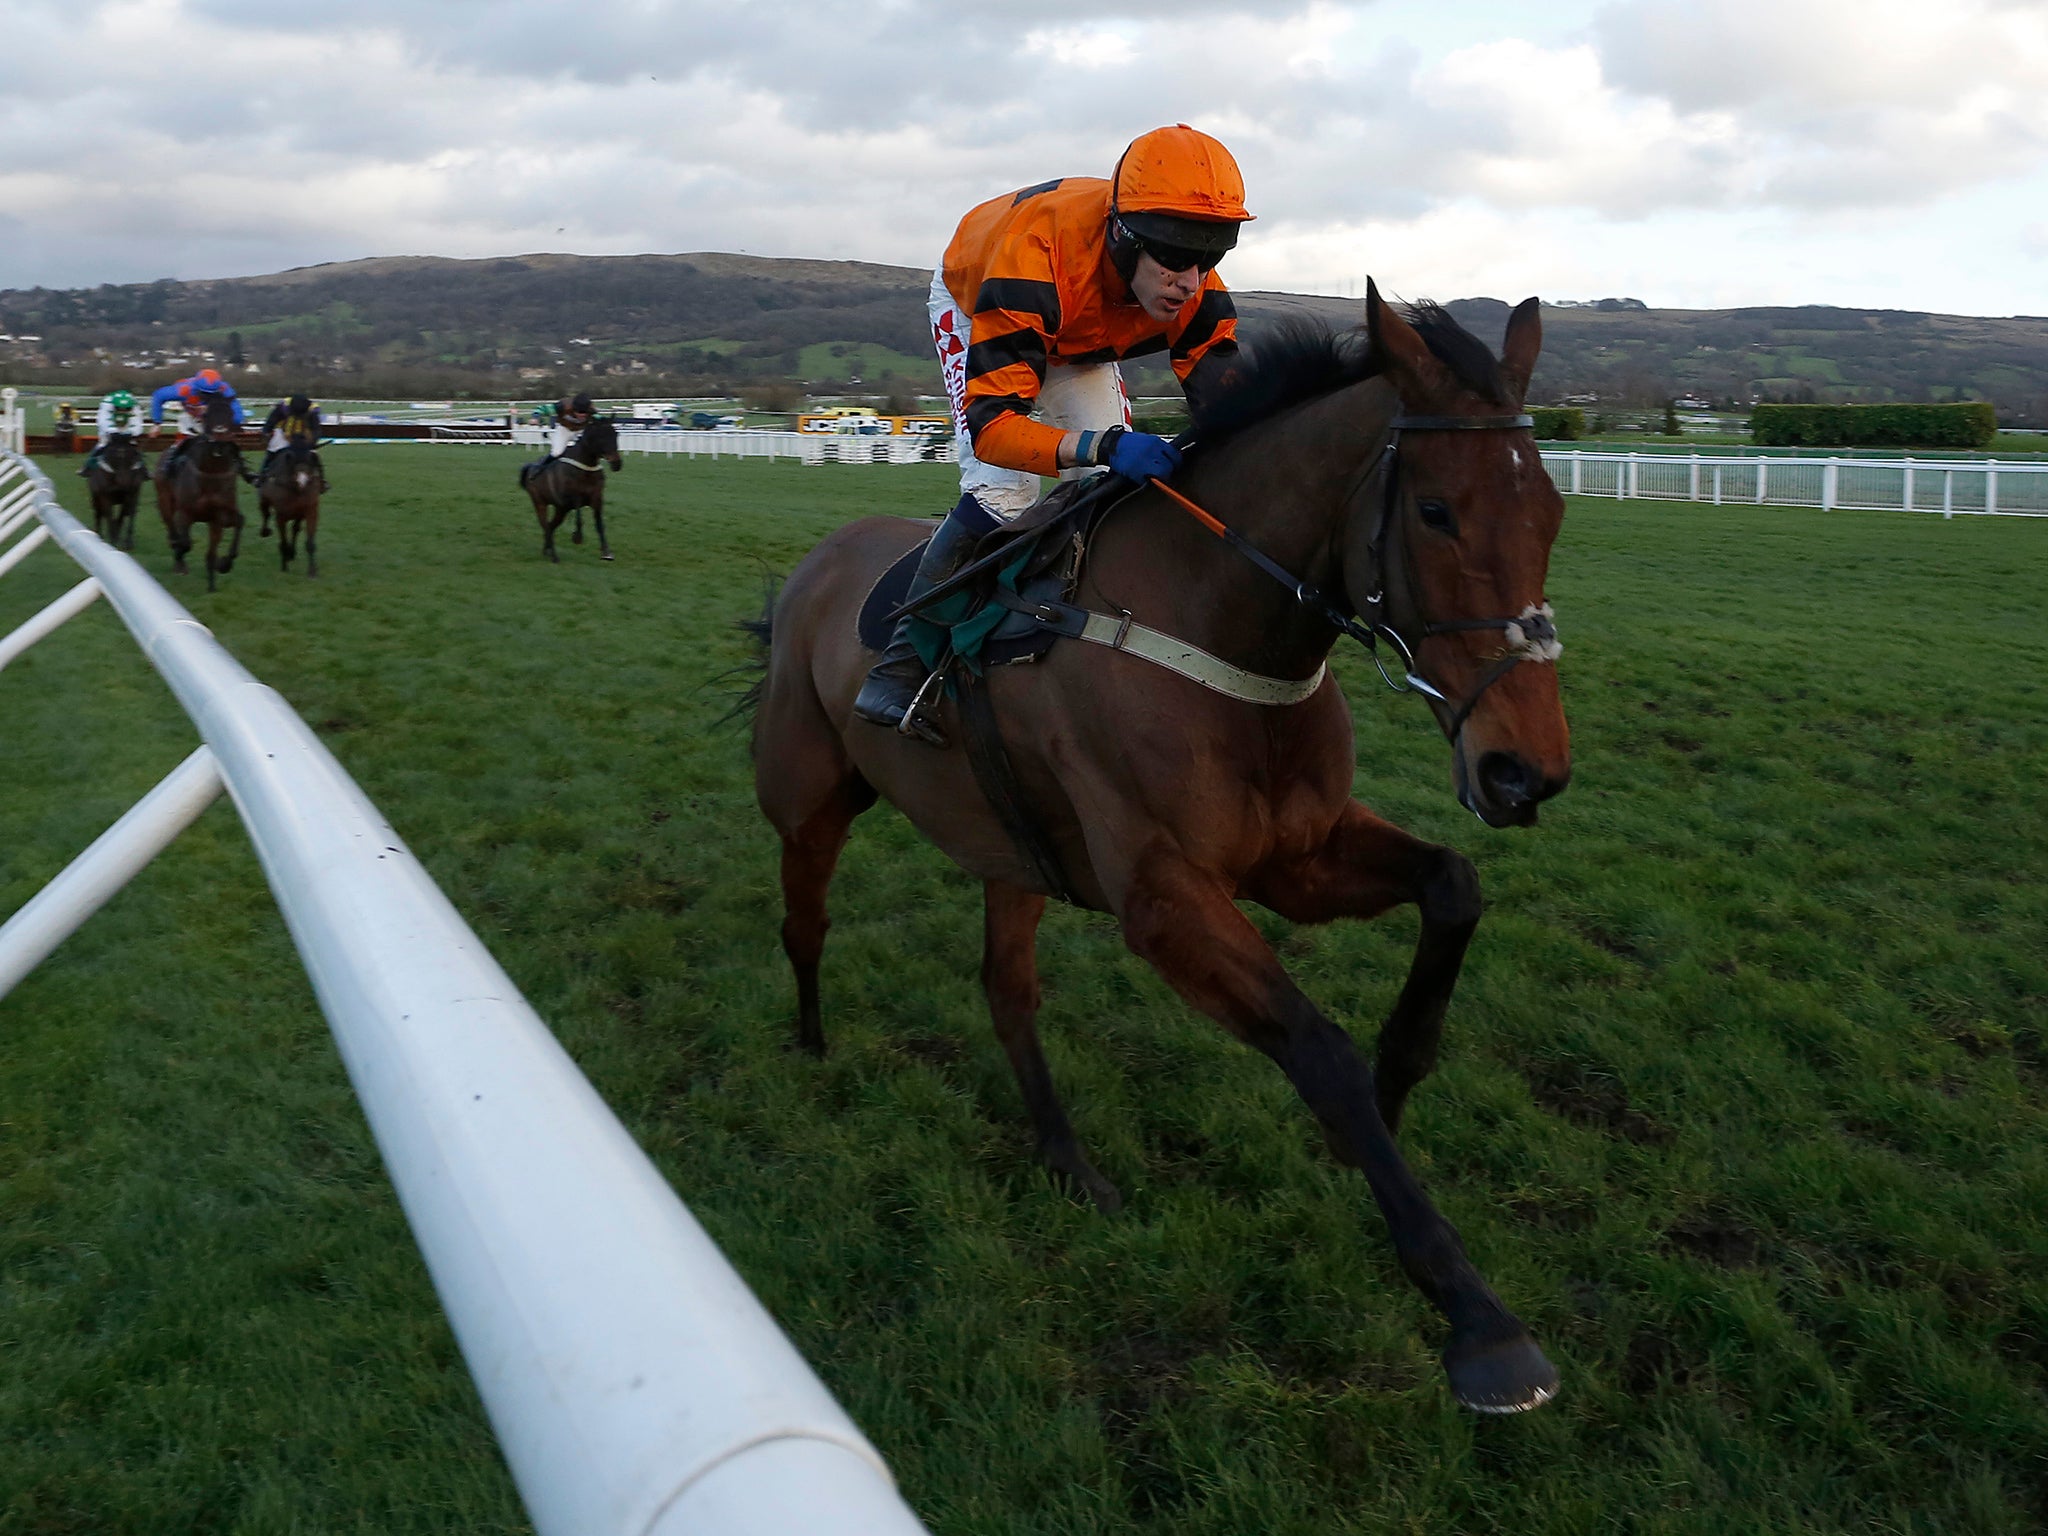 Tom Scudamore riding Thistlecrack clear the last to win The galliardhomes.com Cleeve Hurdle Race at Cheltenham in January